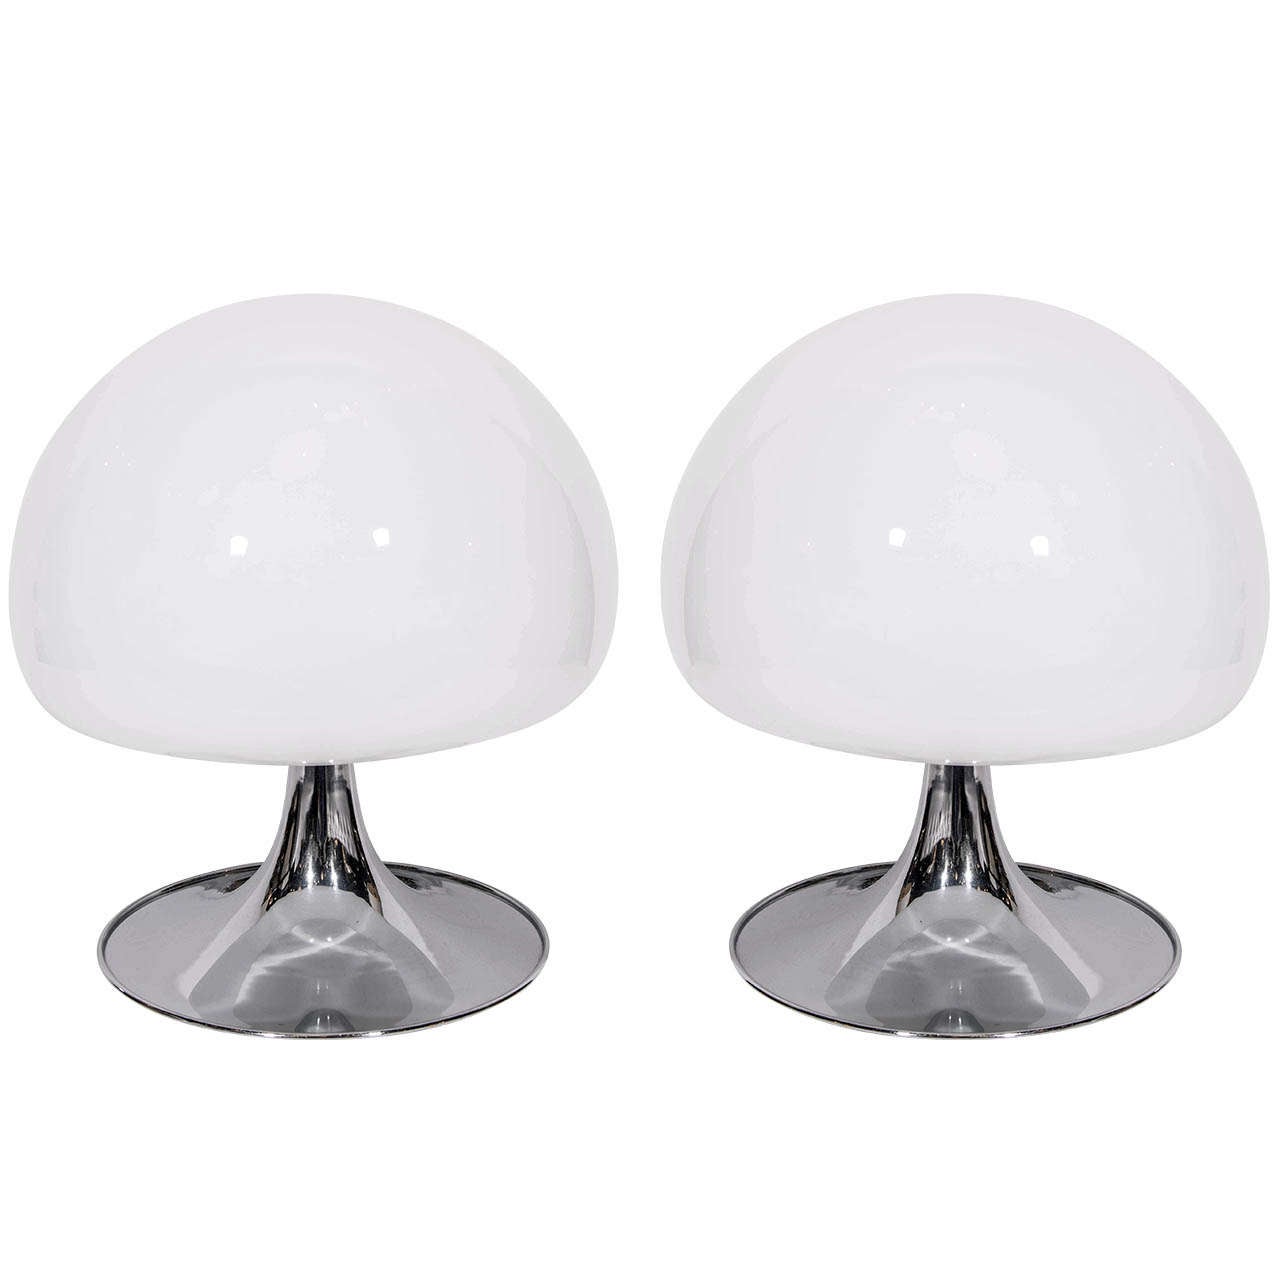 Pair of Ultra Modernist Table Lamps Designed by Goffredo Reggiani